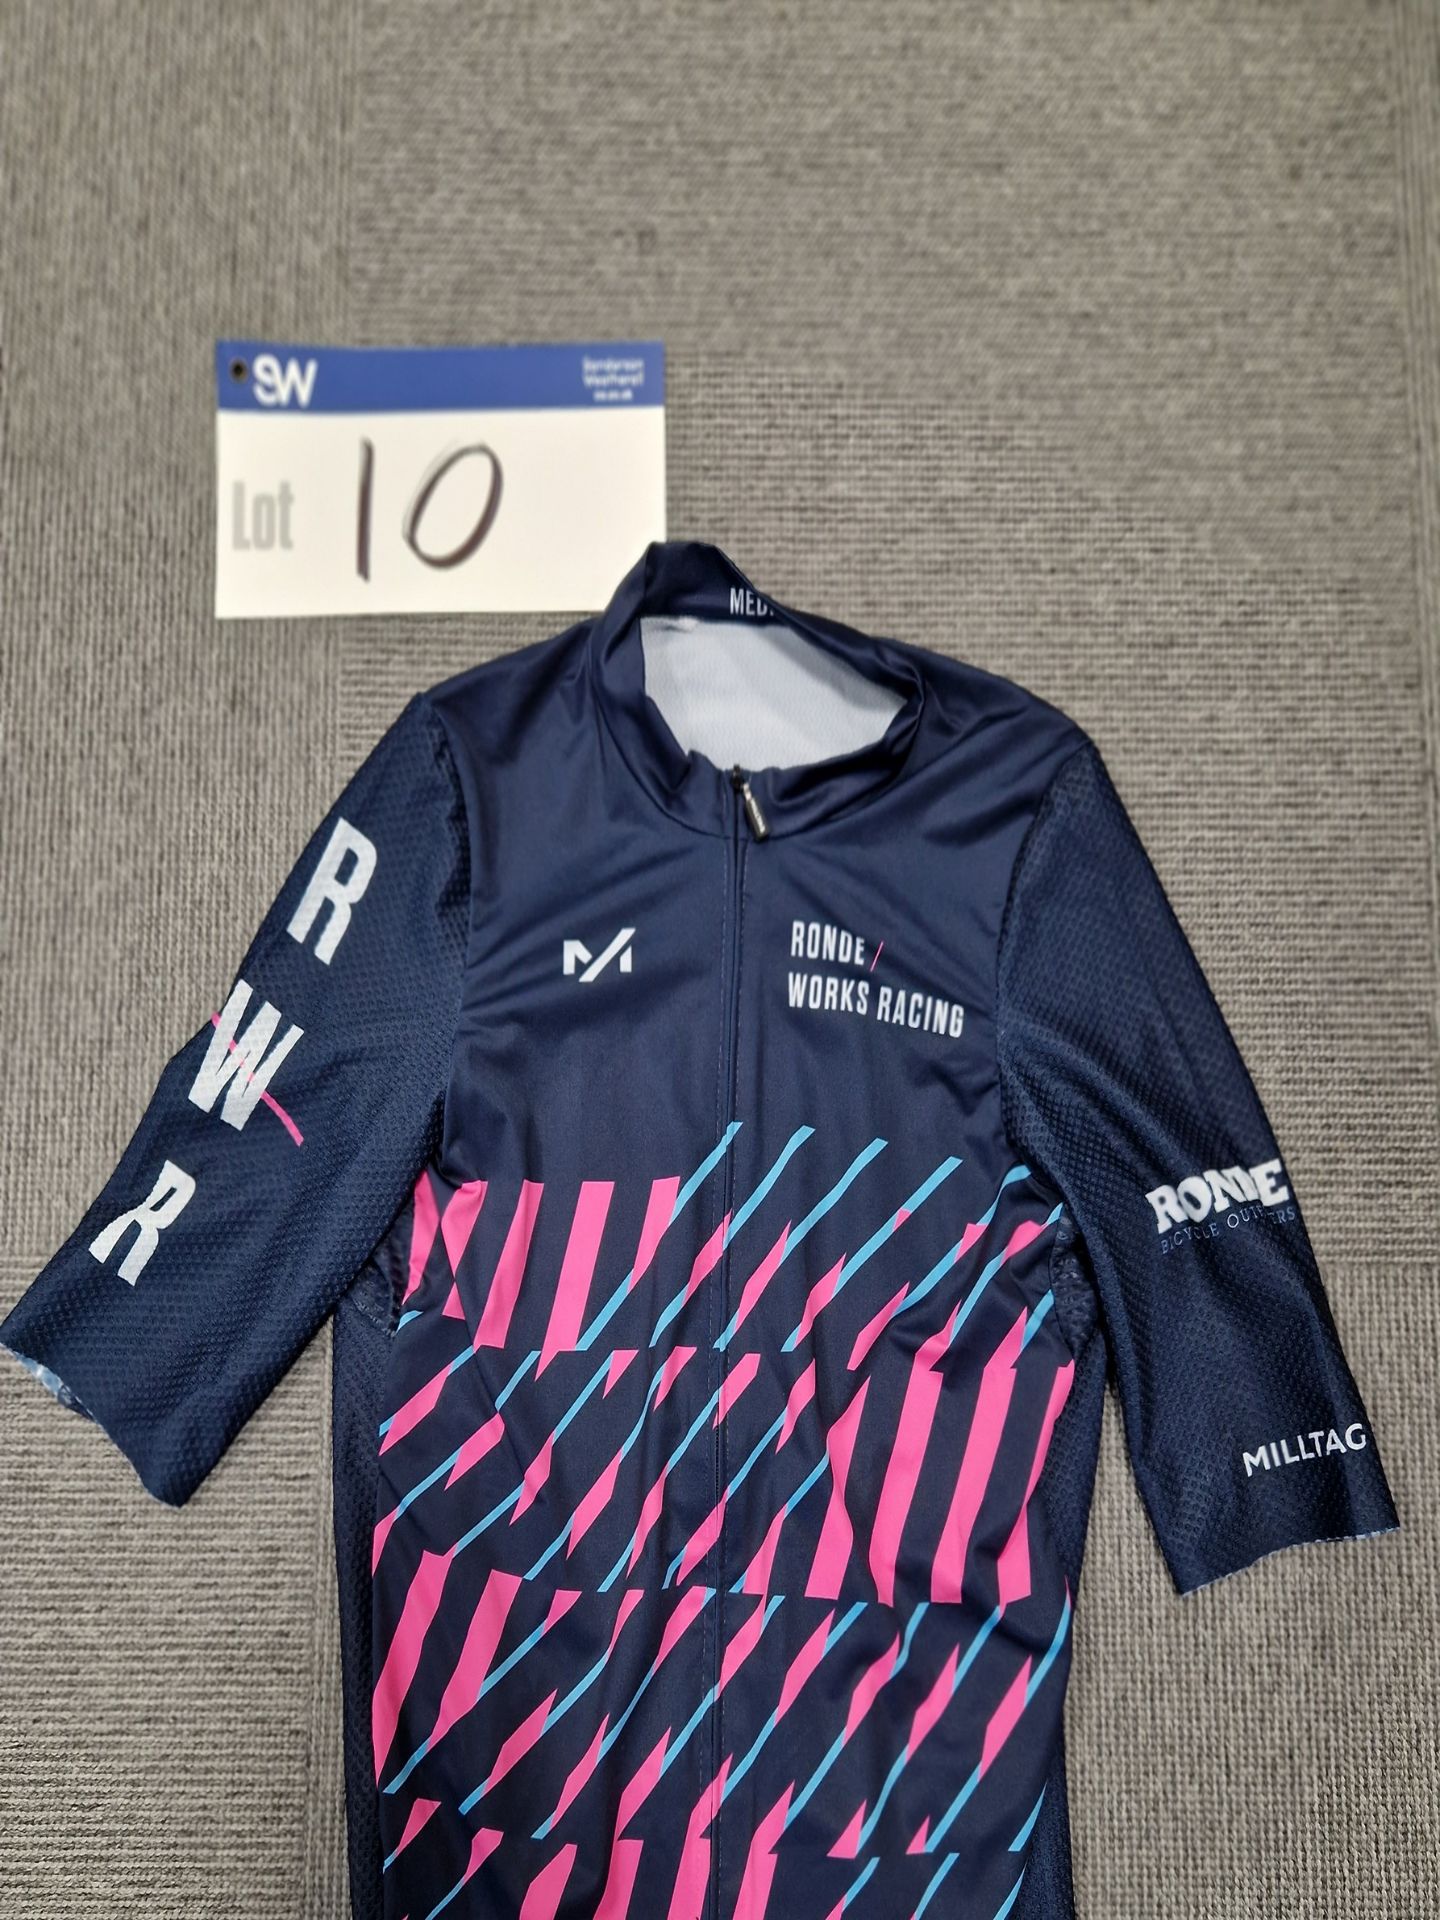 Men's Medium Milltag Cycling Jersey, Branded Ronde Works Racing, 80% Polyester 20% ElastanePlease